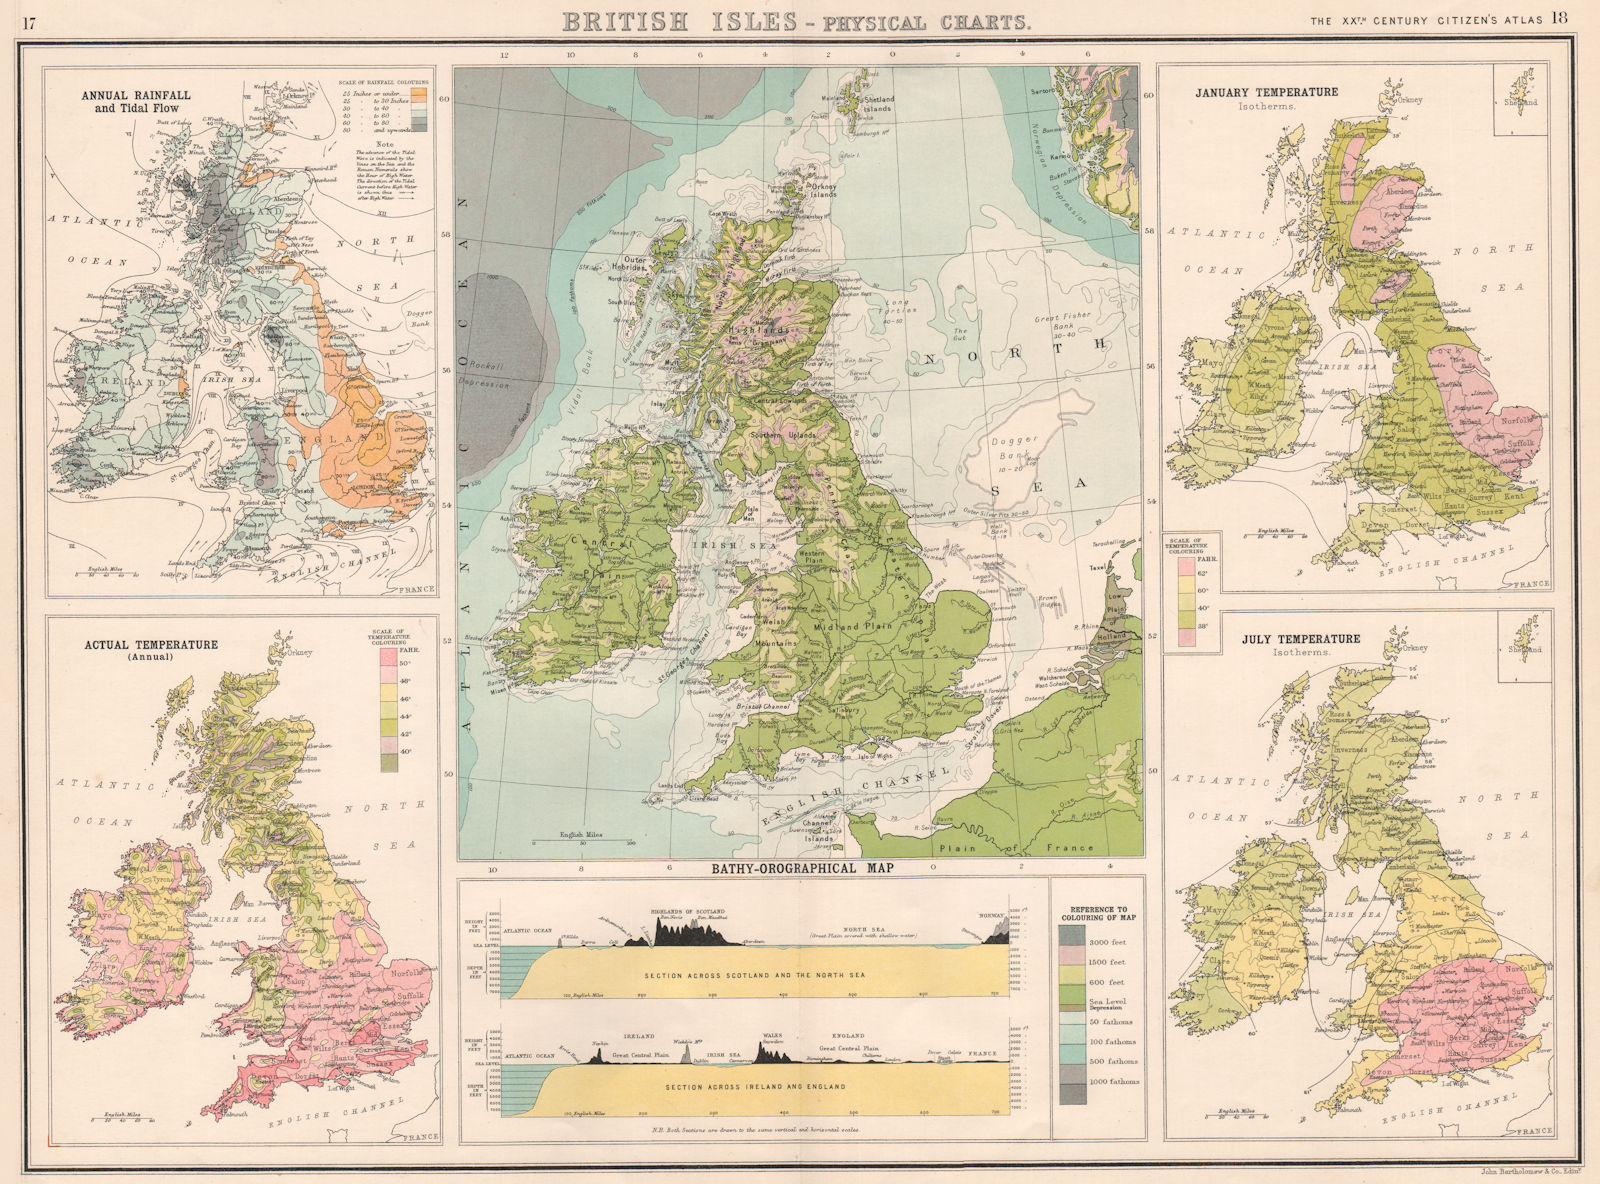 BRITISH ISLES PHYSICAL. Rainfall Tidal Flow Temperature W-E Sections 1901 map